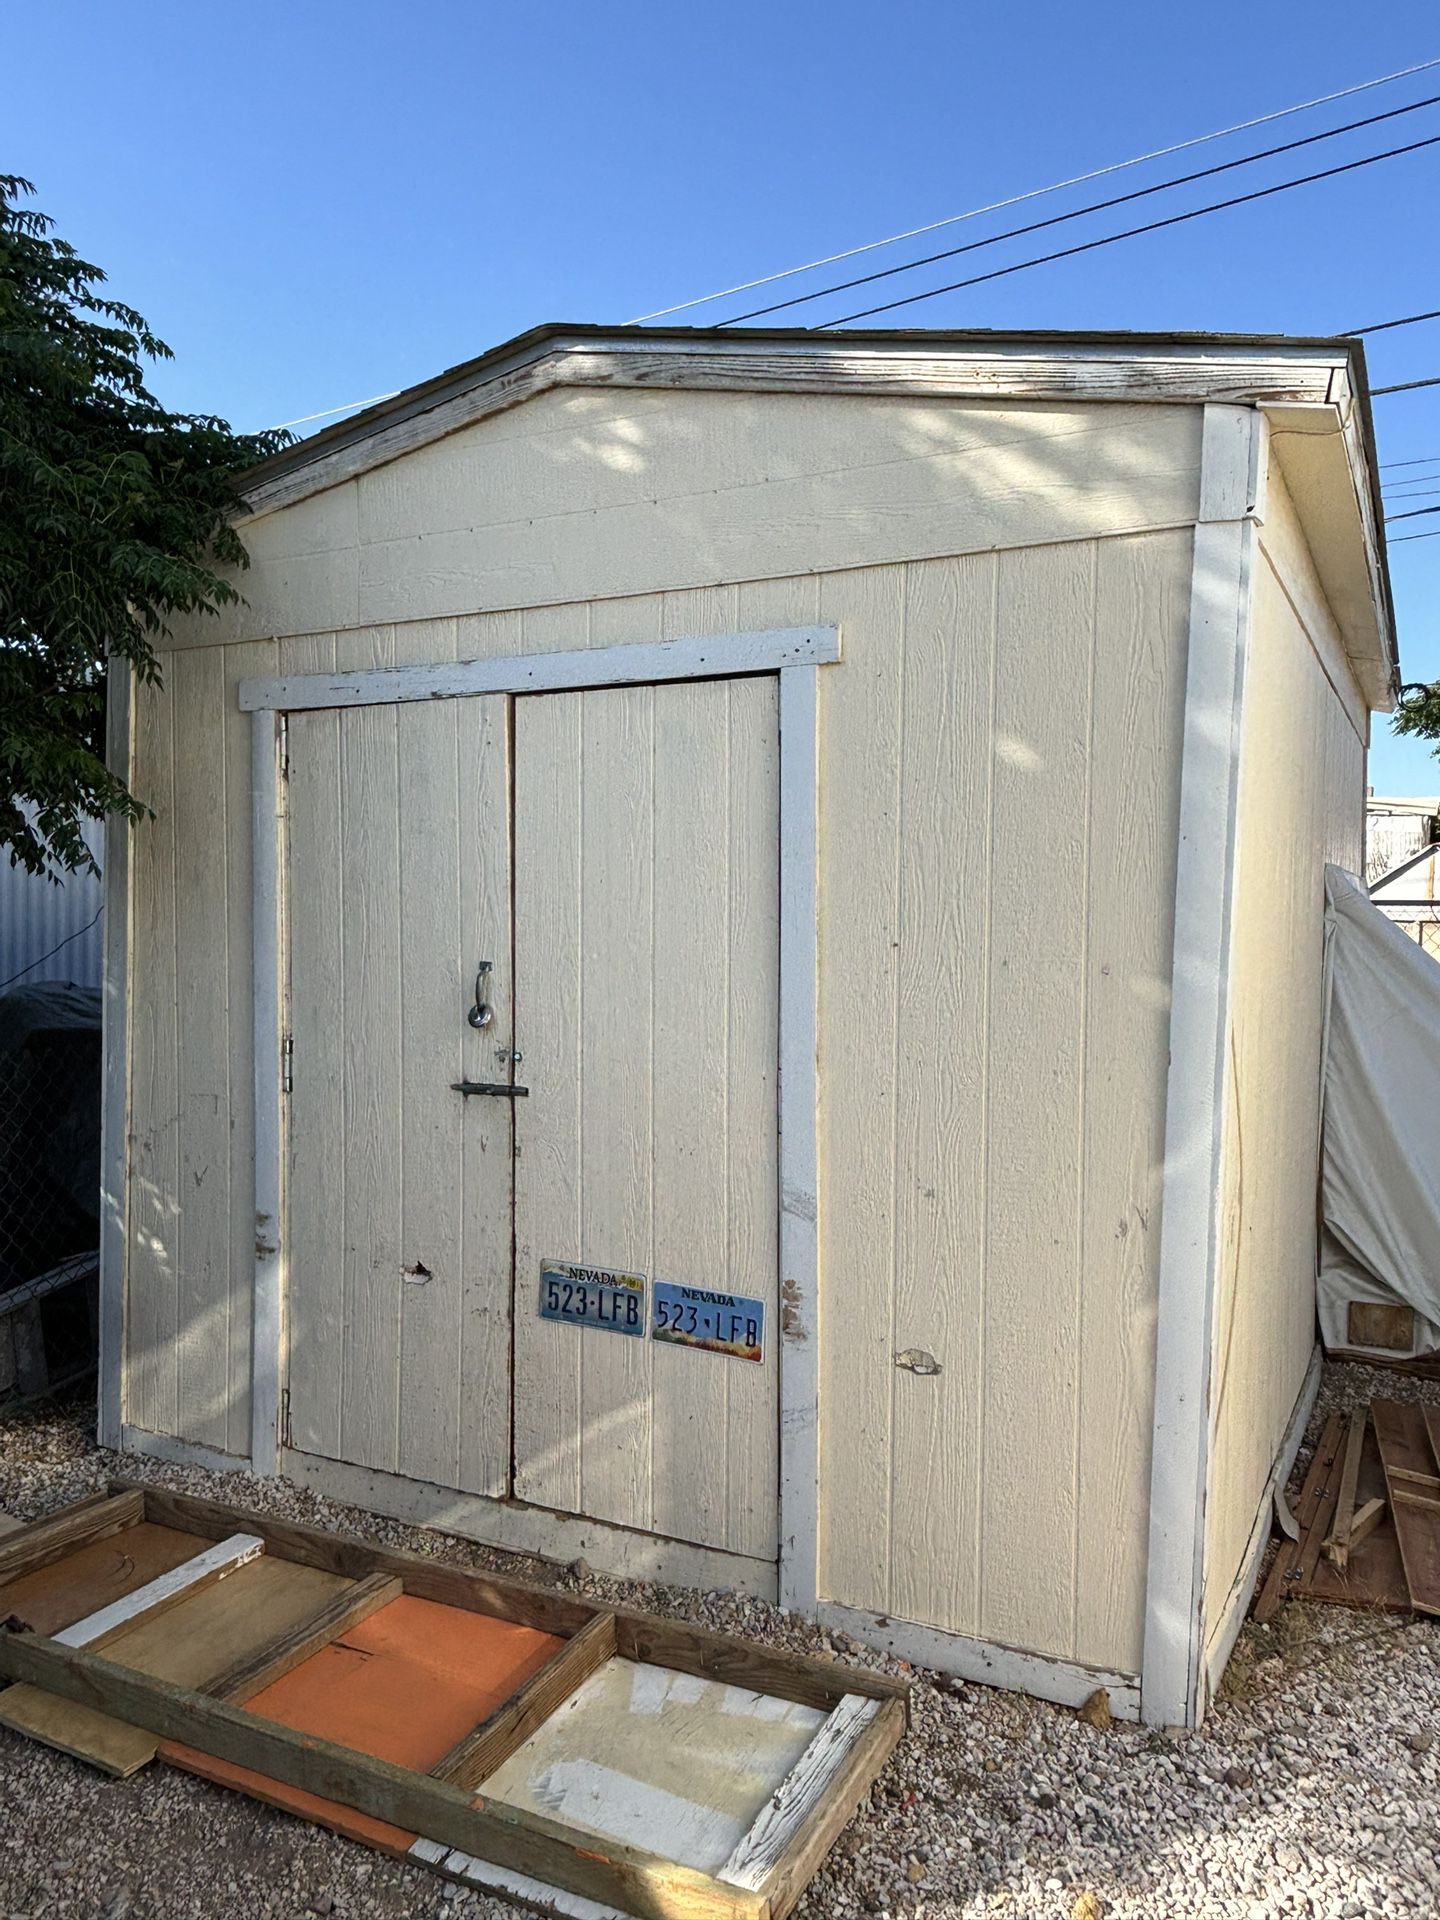 10’x15’ PRICE REDUCED TO $850.00 MAKE OFFER!!! Shed 850 OBO!!